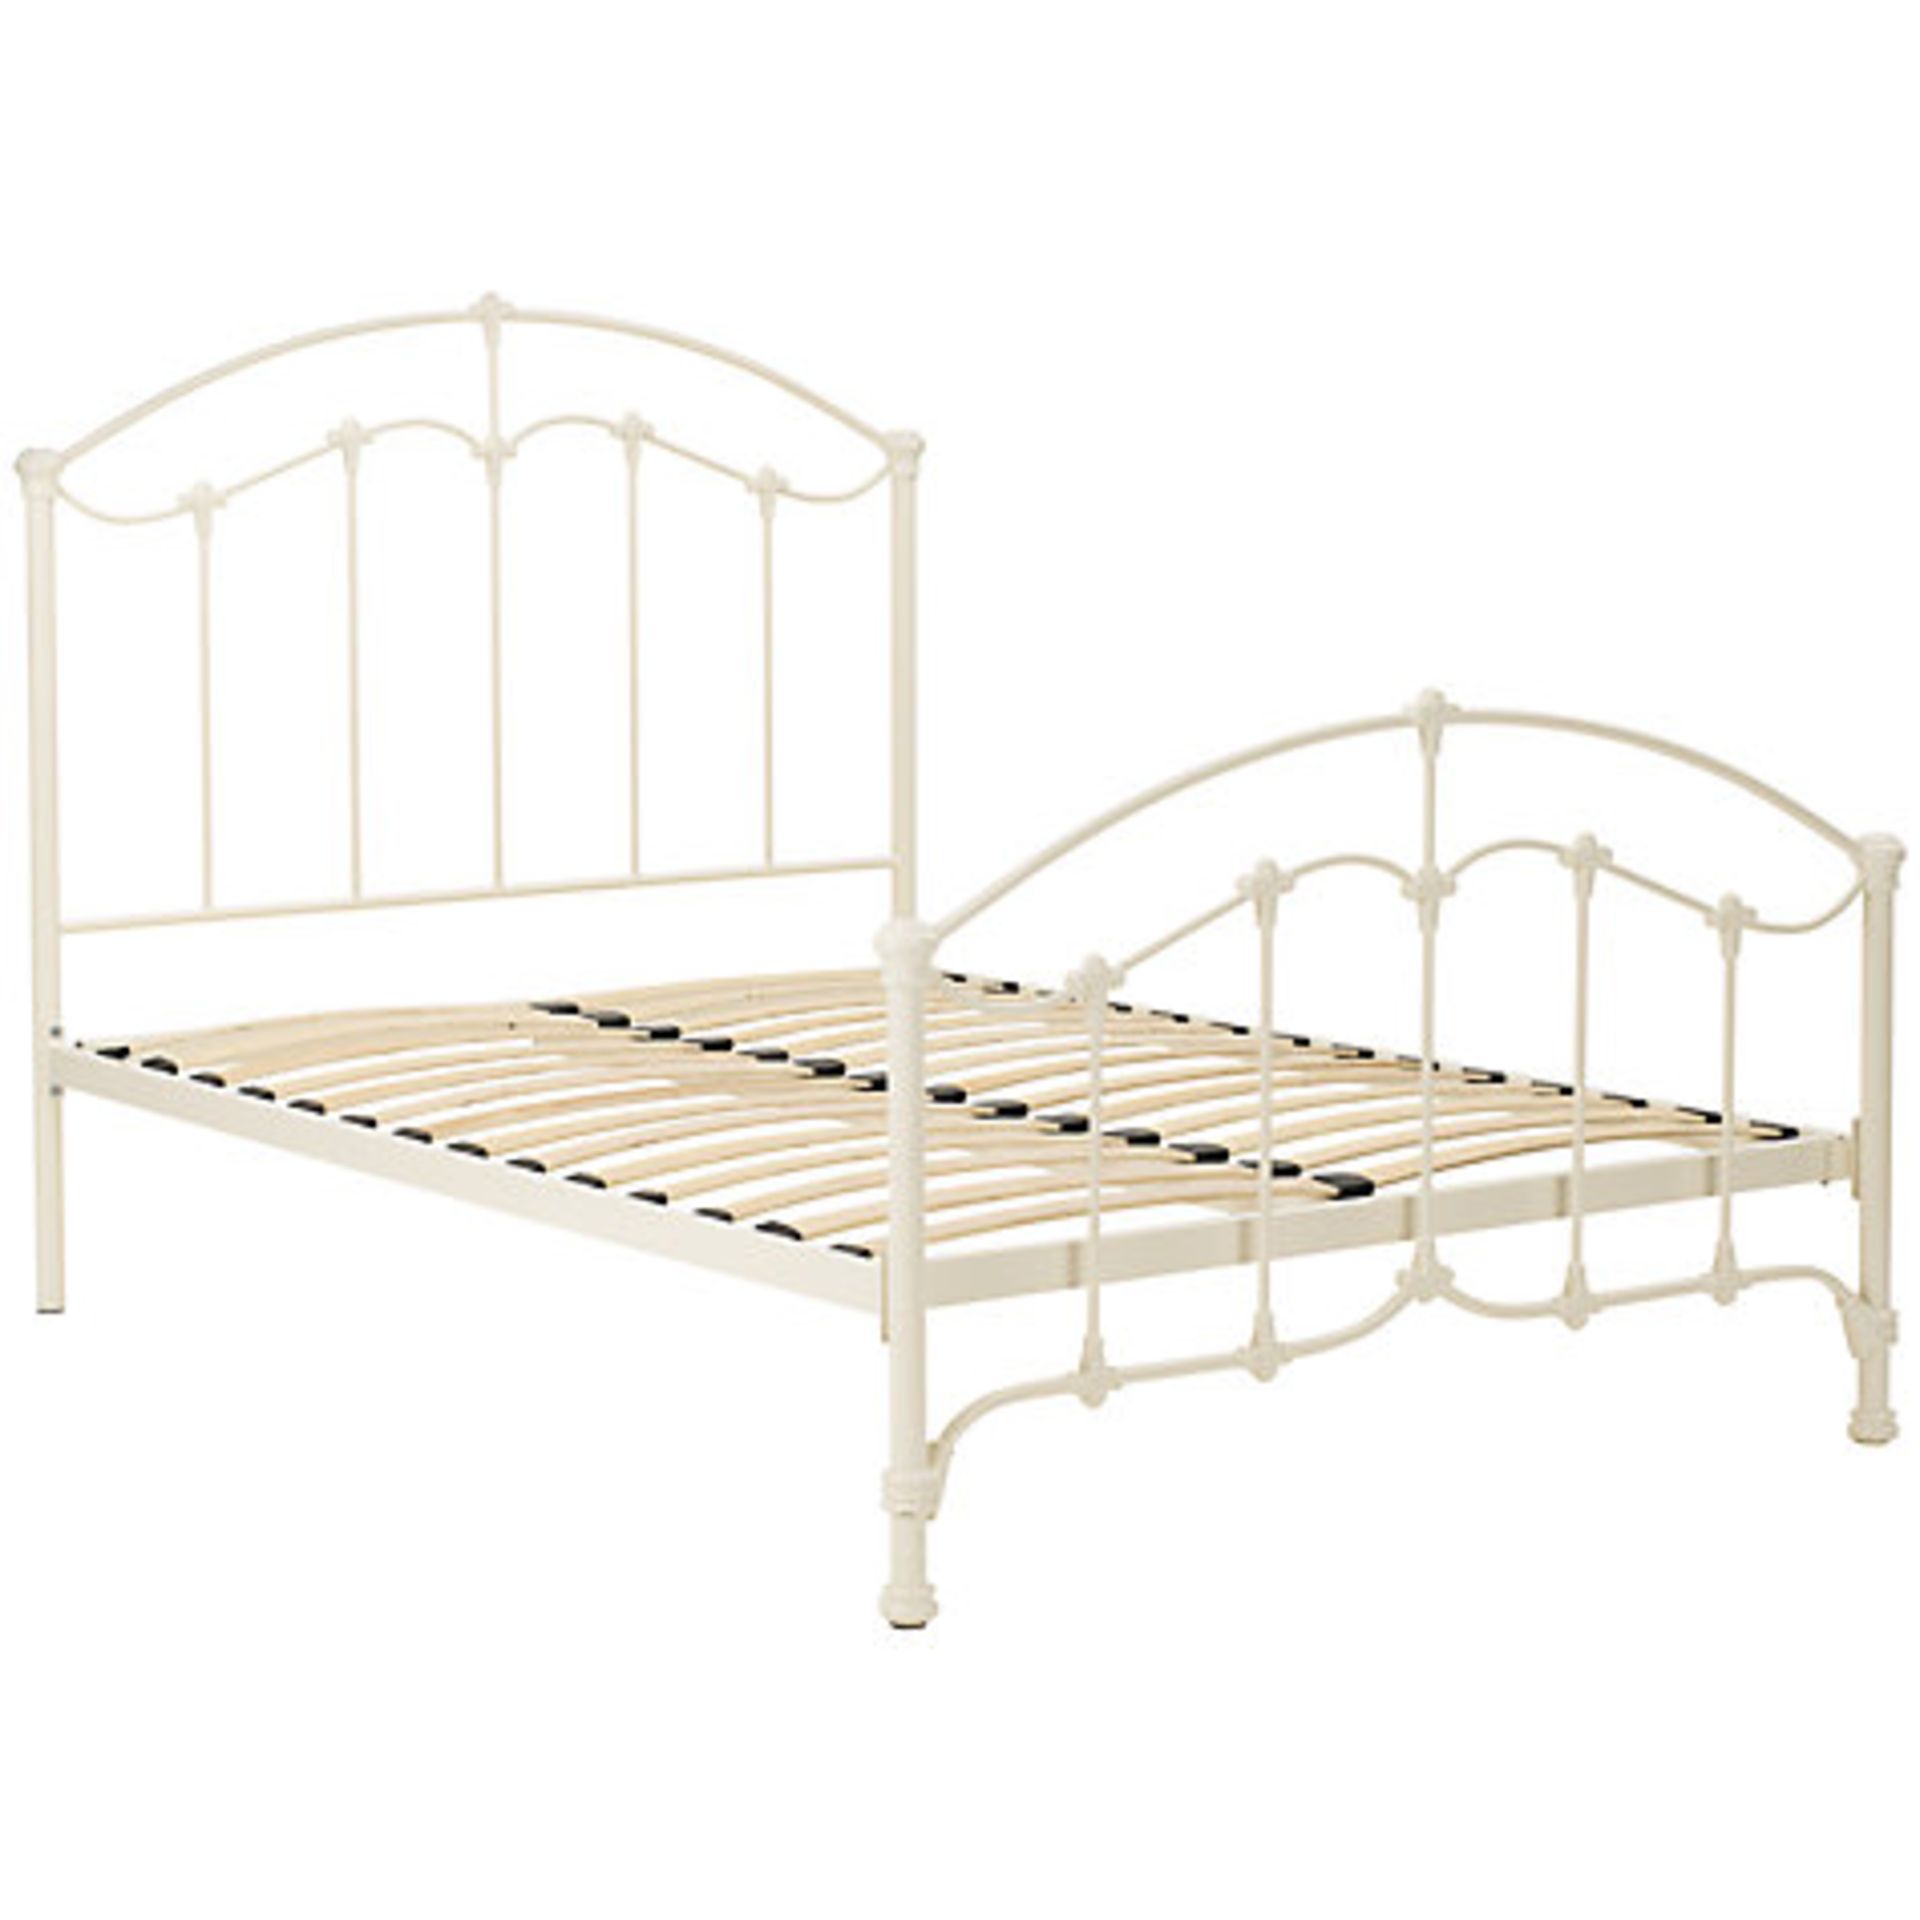 1 x BOXED DAISY 150CM BEDSTEAD RRP £400 (7243) (23.1.15)  *PLEASE NOTE THAT THE BID PRICE IS